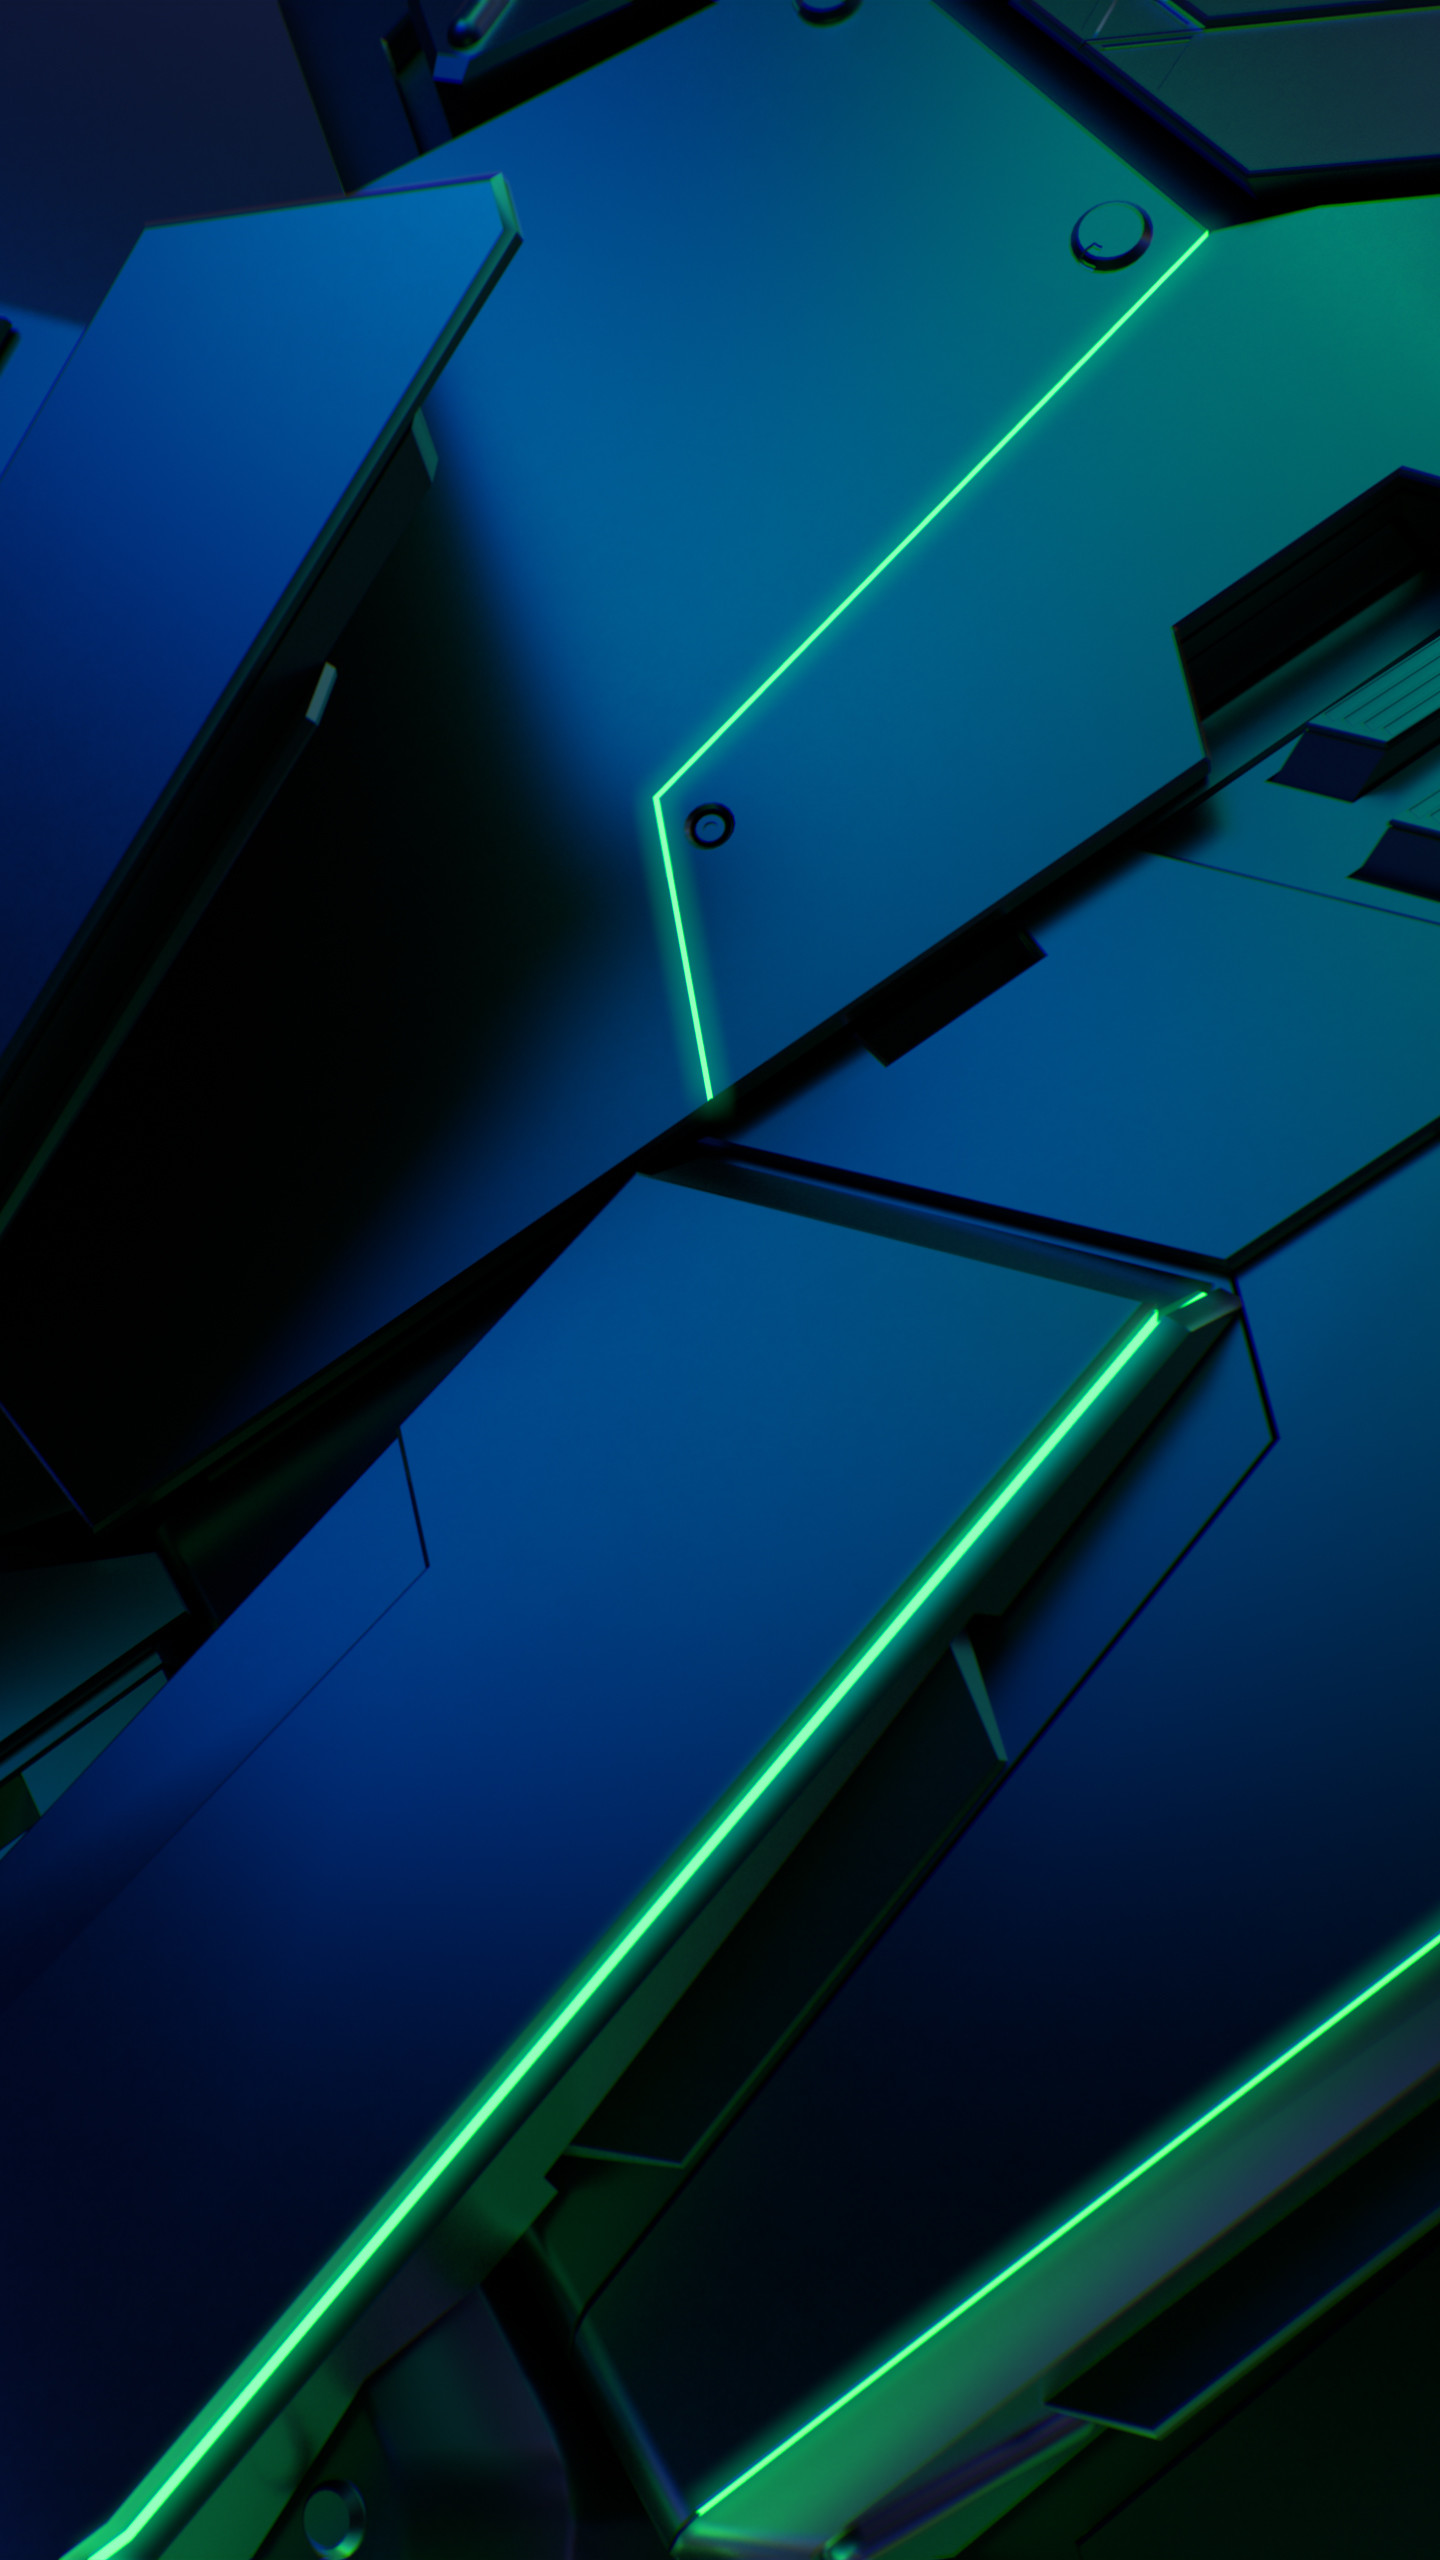 Download RAZER Phone Stock Wallpapers in QHD (Updated) - DroidViews